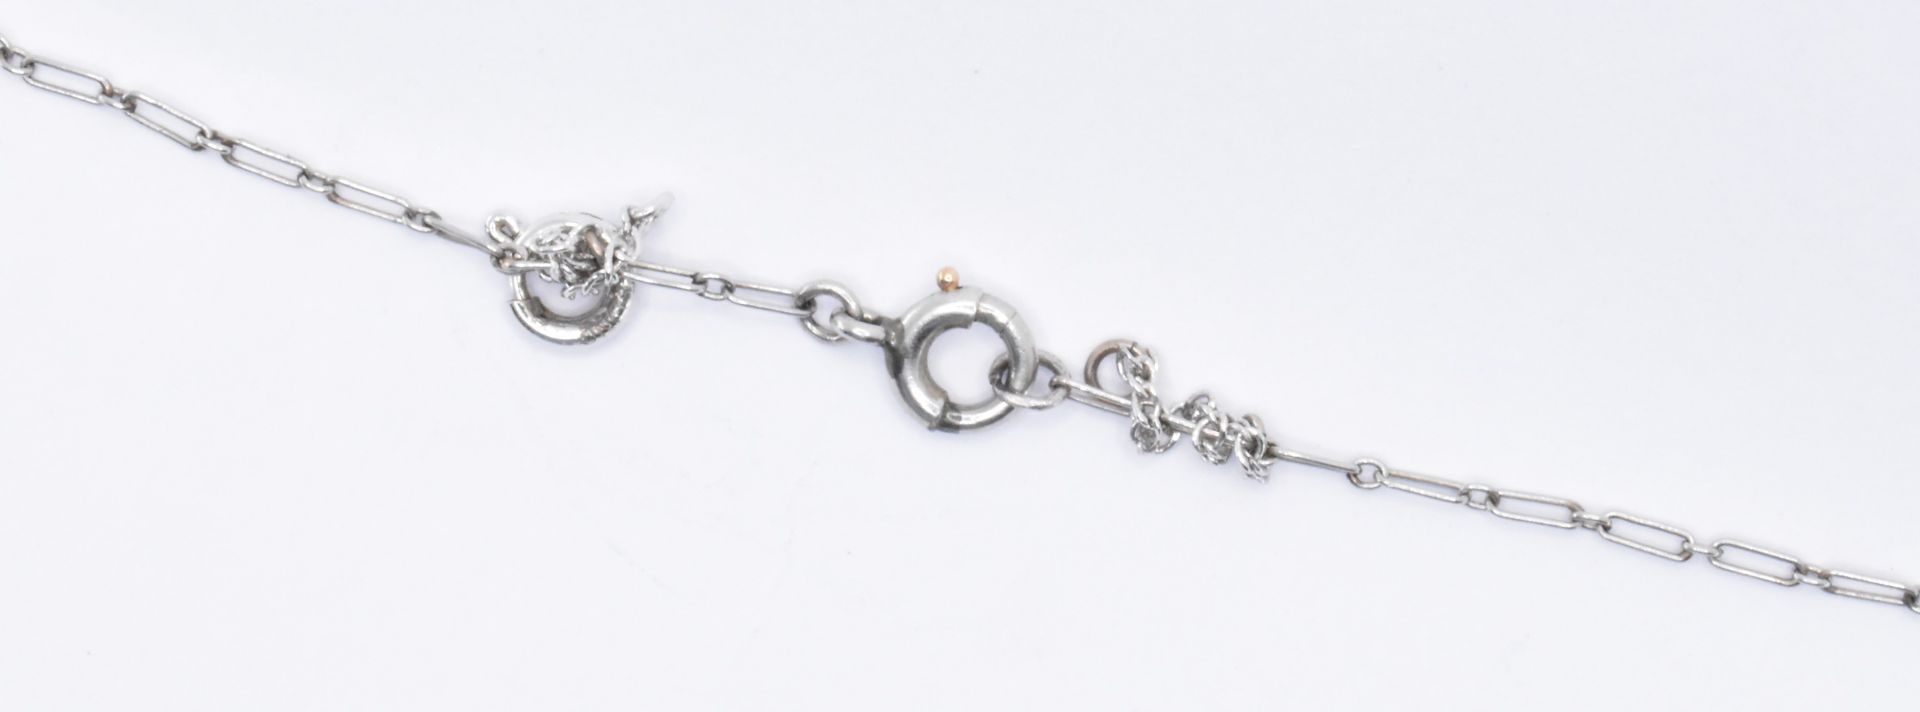 EDWARDIAN PLATINUM & PEARL NECKLACE CHAIN - Image 3 of 3